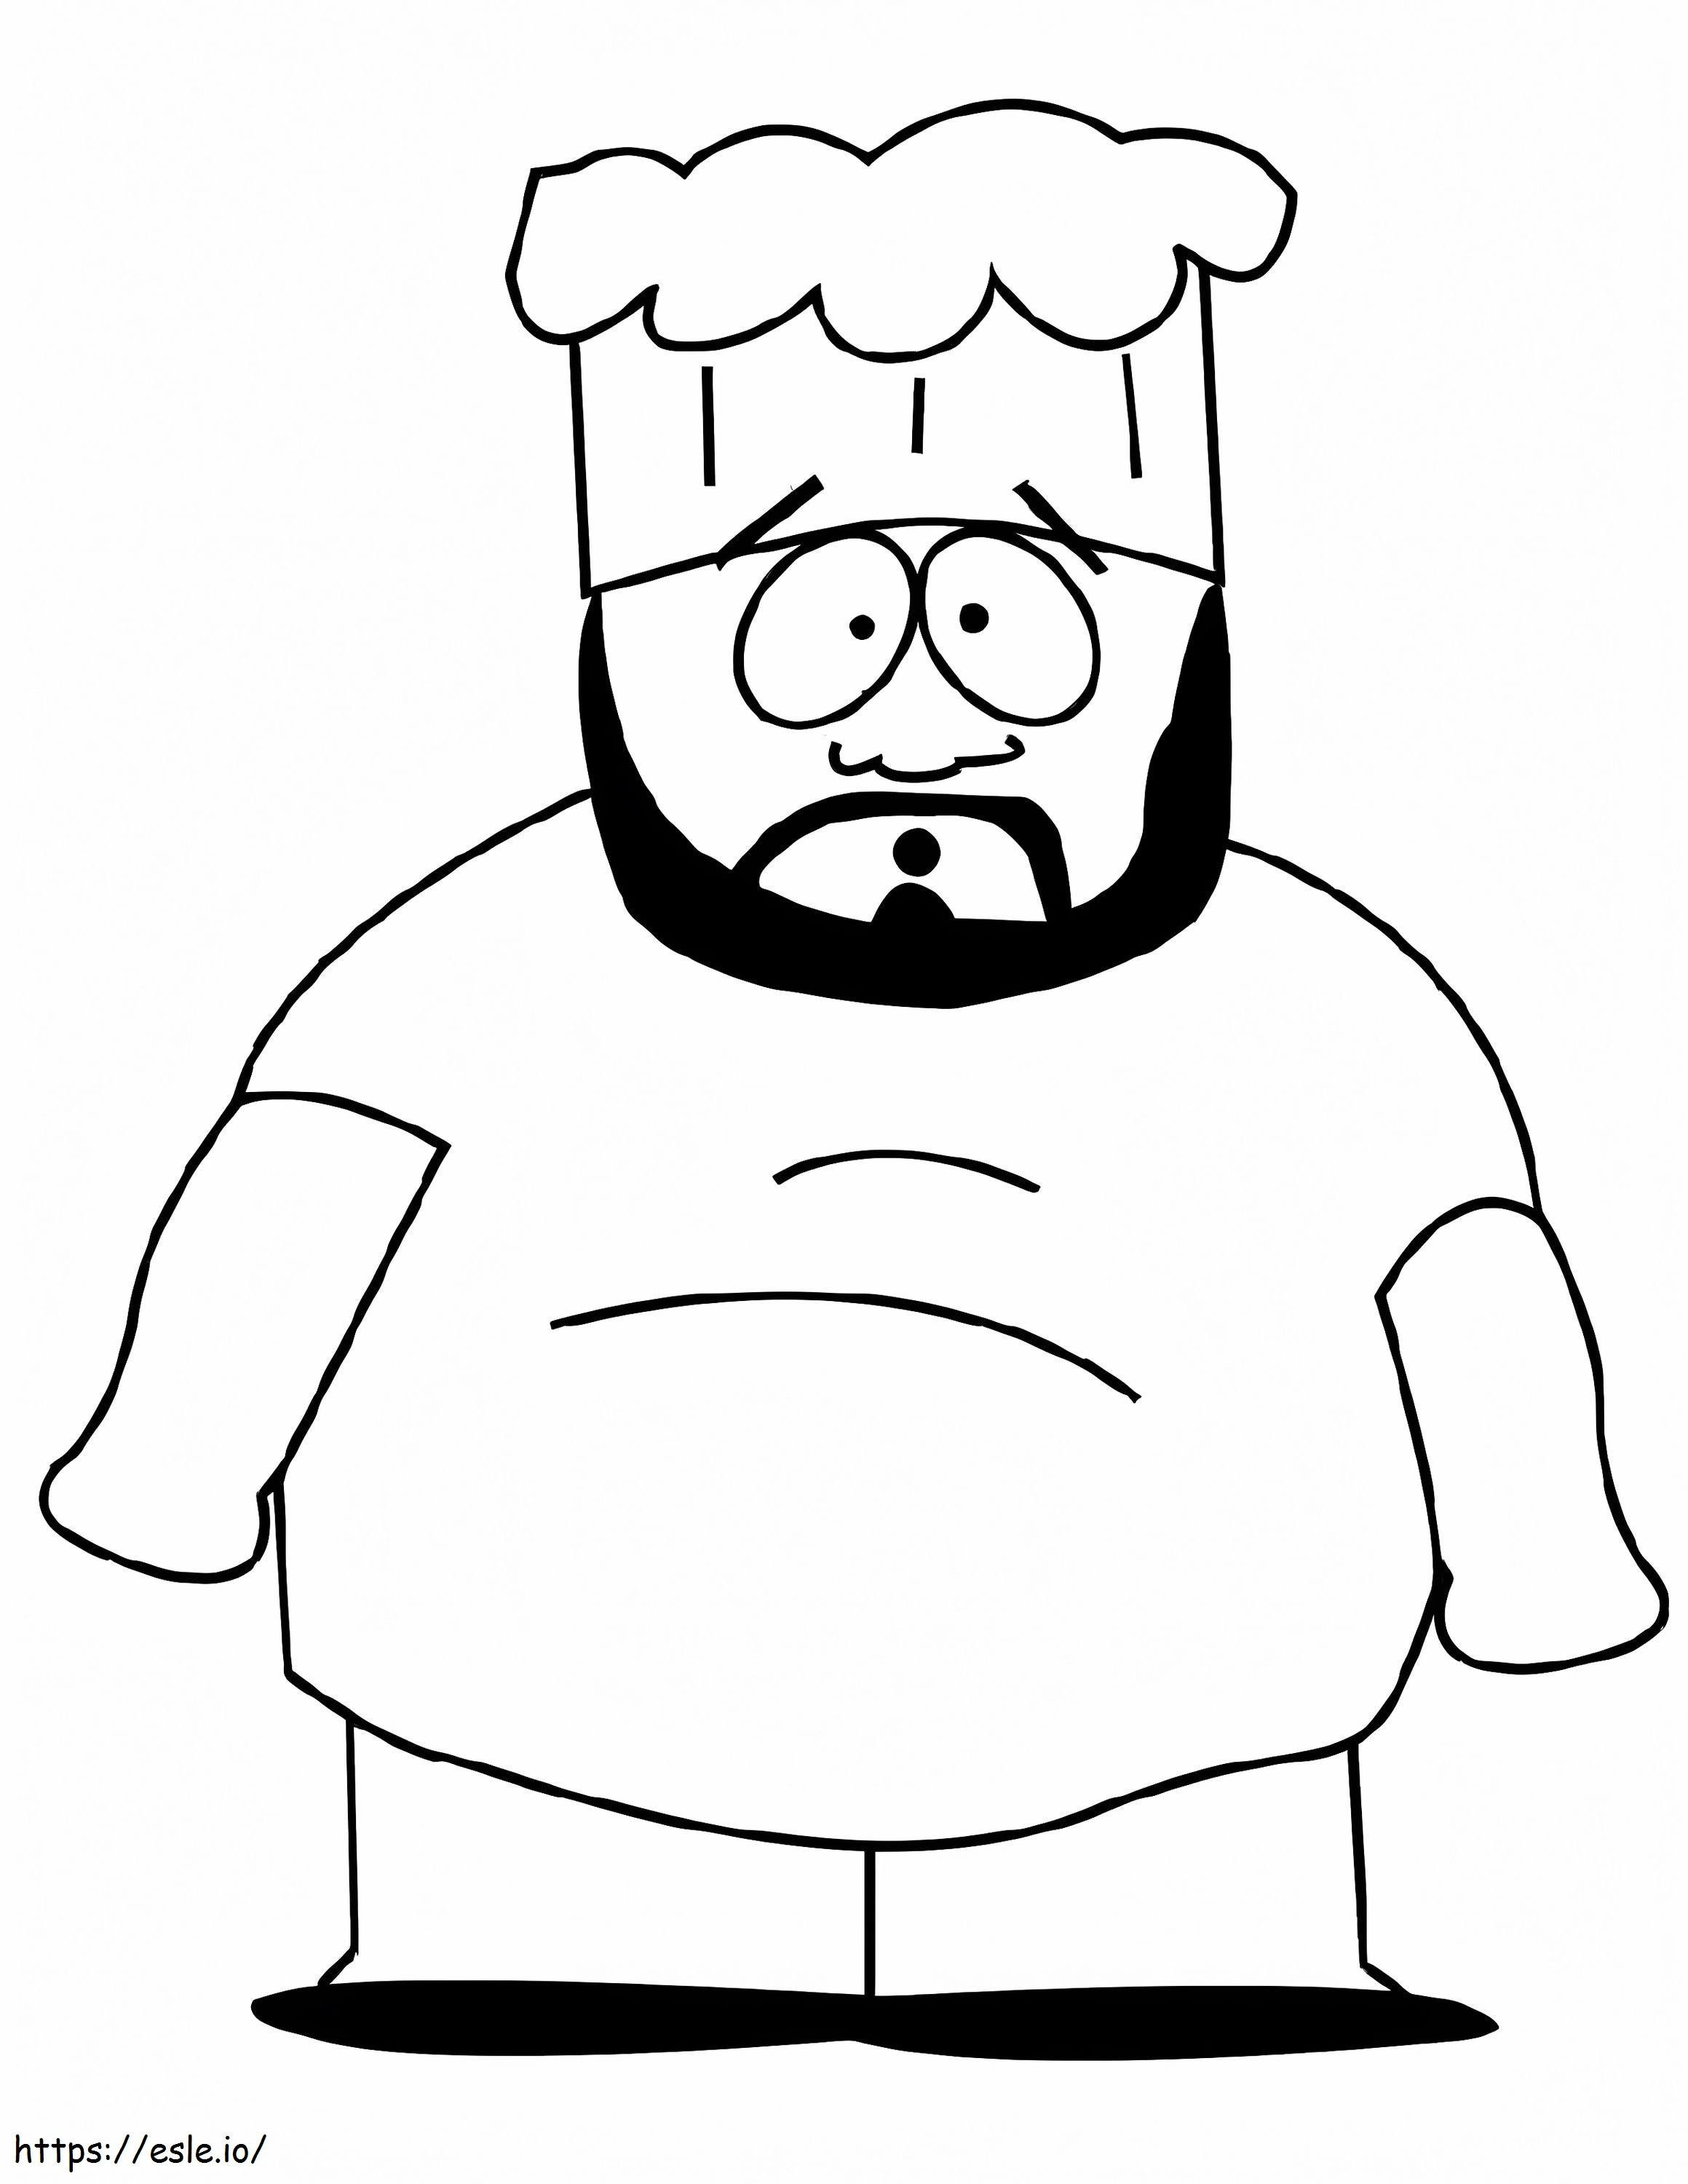 Chef From South Park coloring page